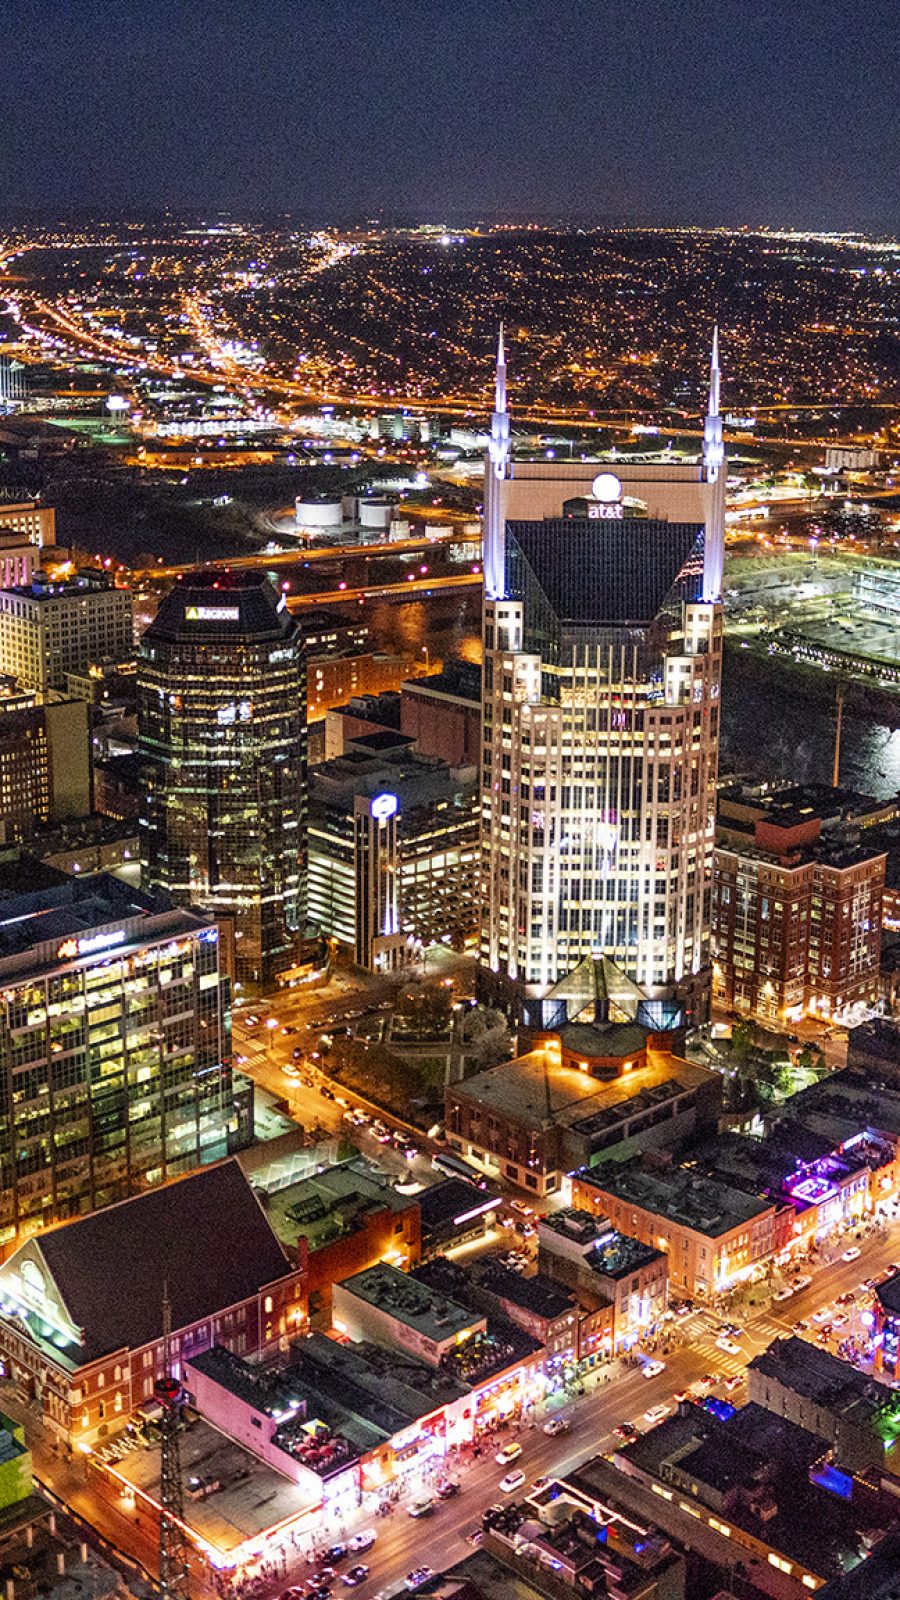 Aerial photo of Downtown Nashville including the Titans Football Stadium.  (Photo by Joe Howell)